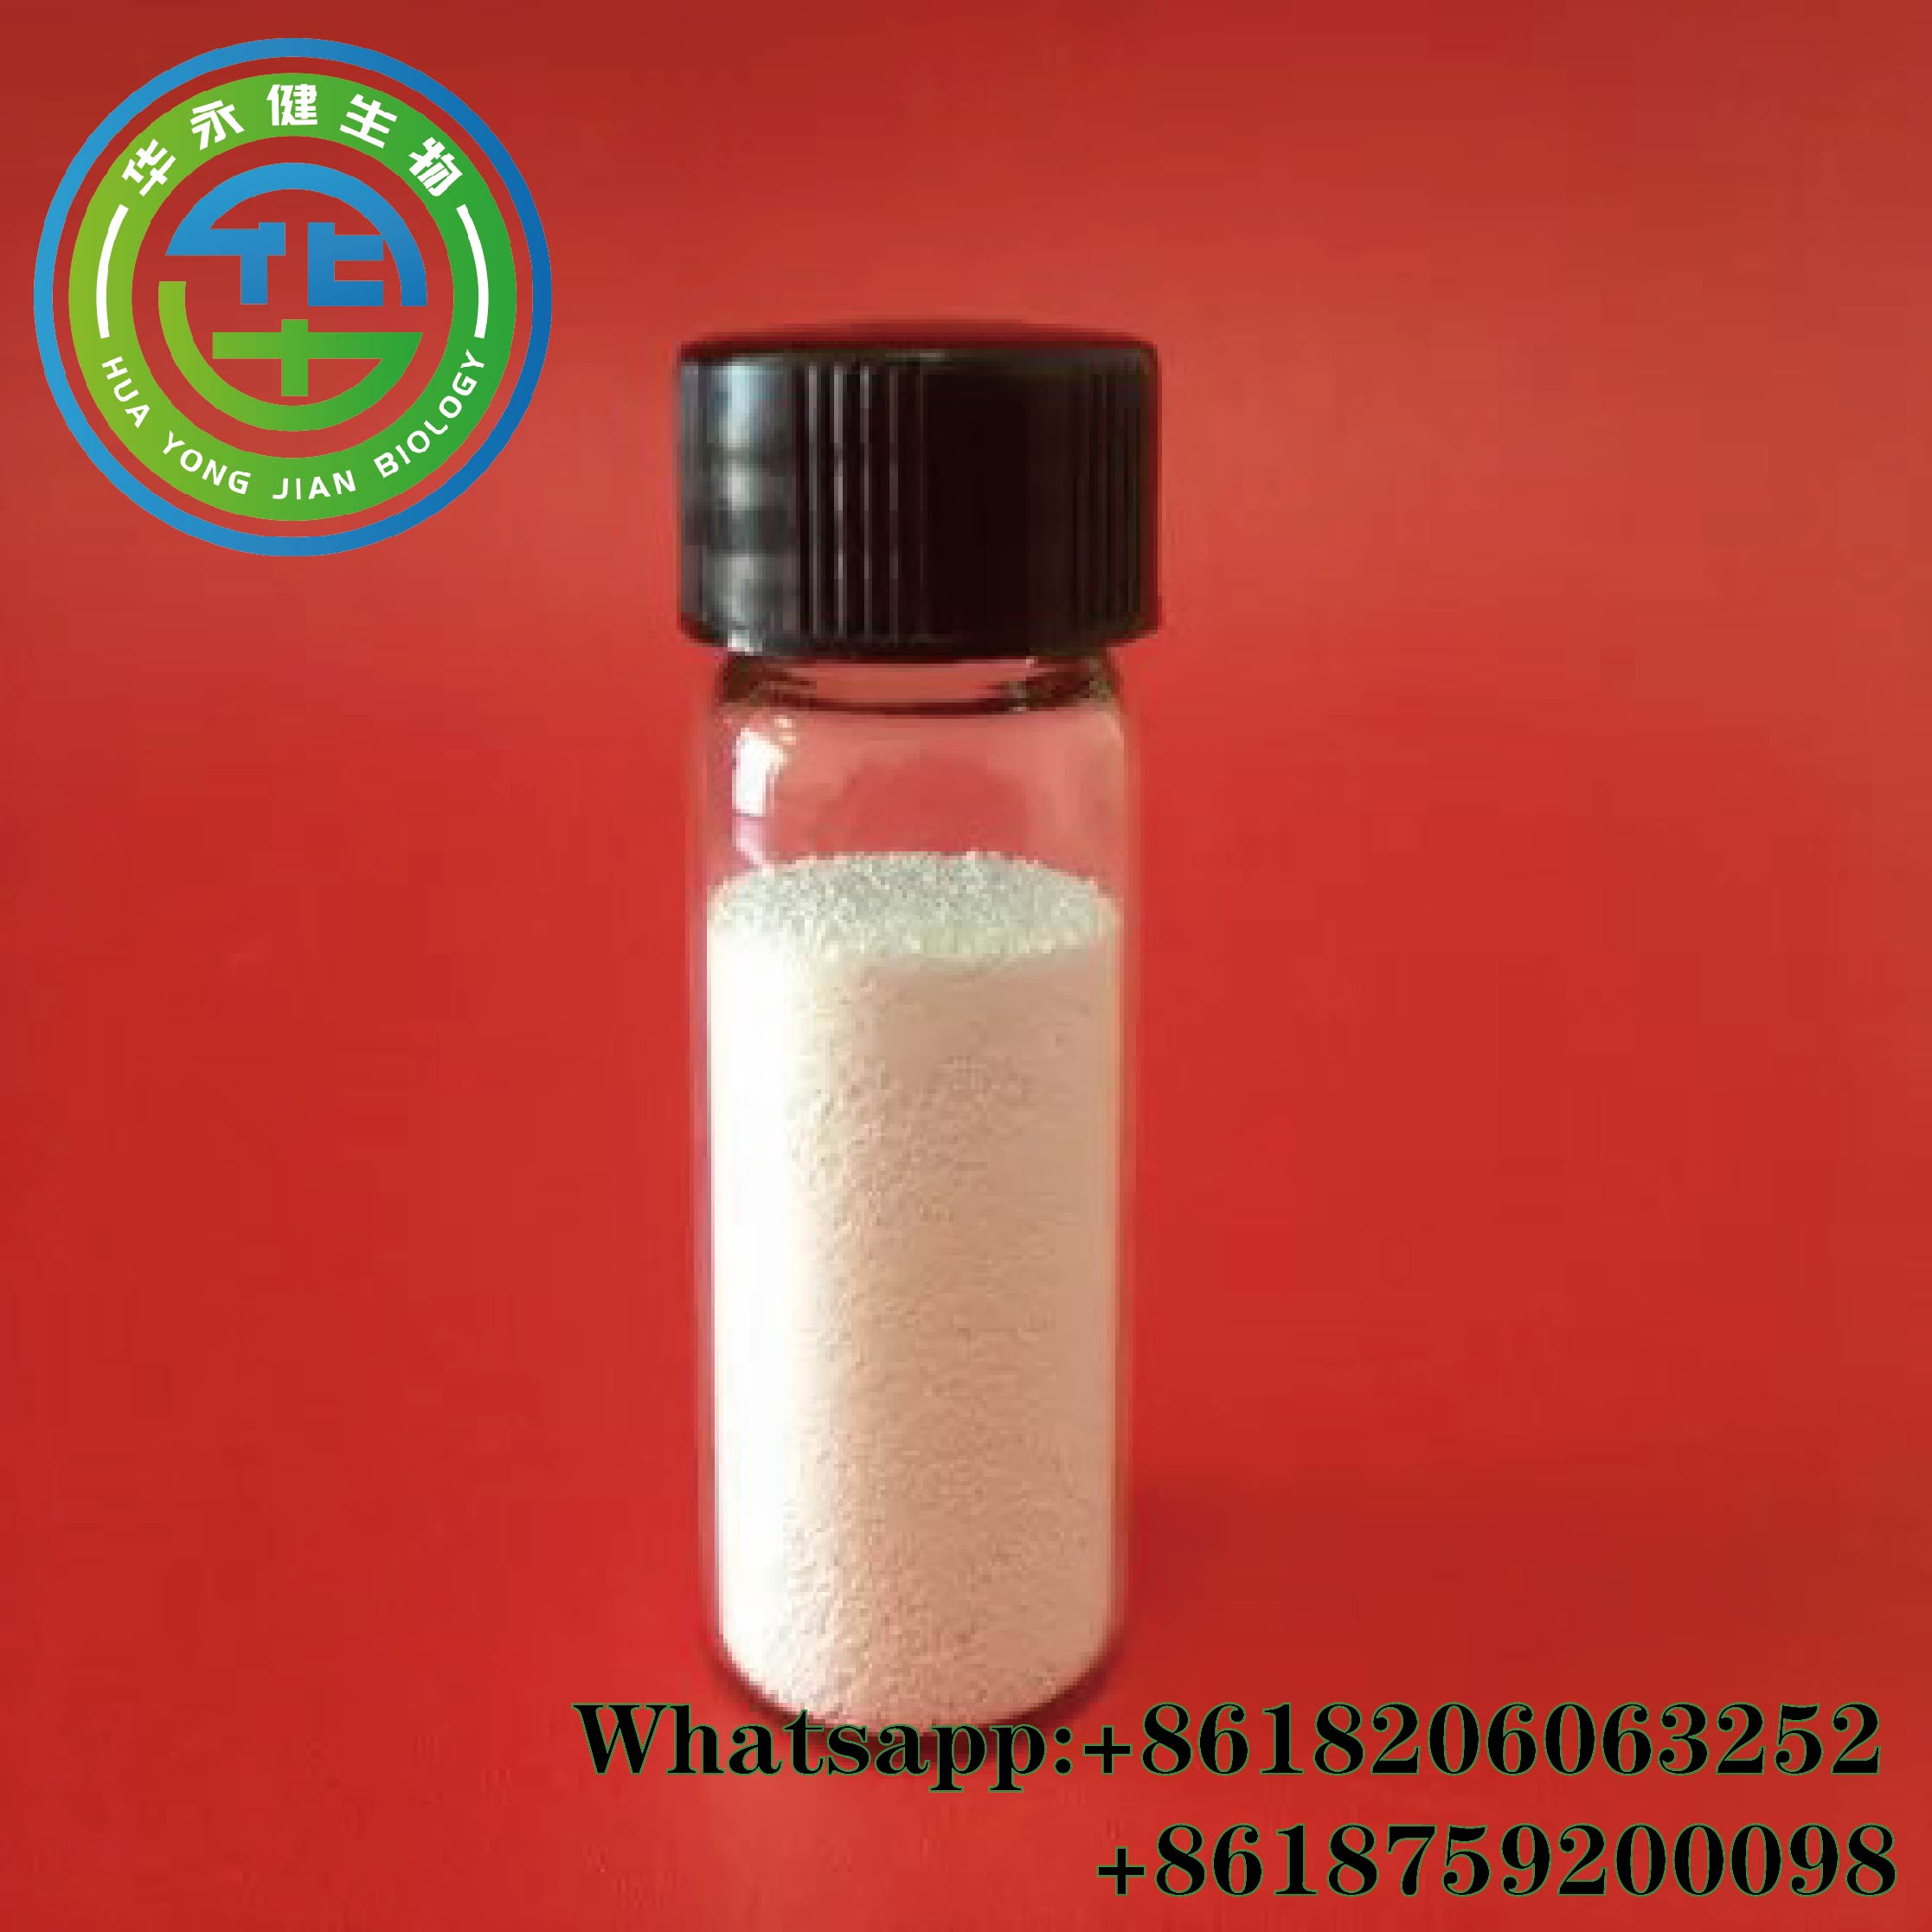 Testosterone Undecanoate/Test U Raw powder For Muscle Bone Strength Cycle CAS 5949-44-0